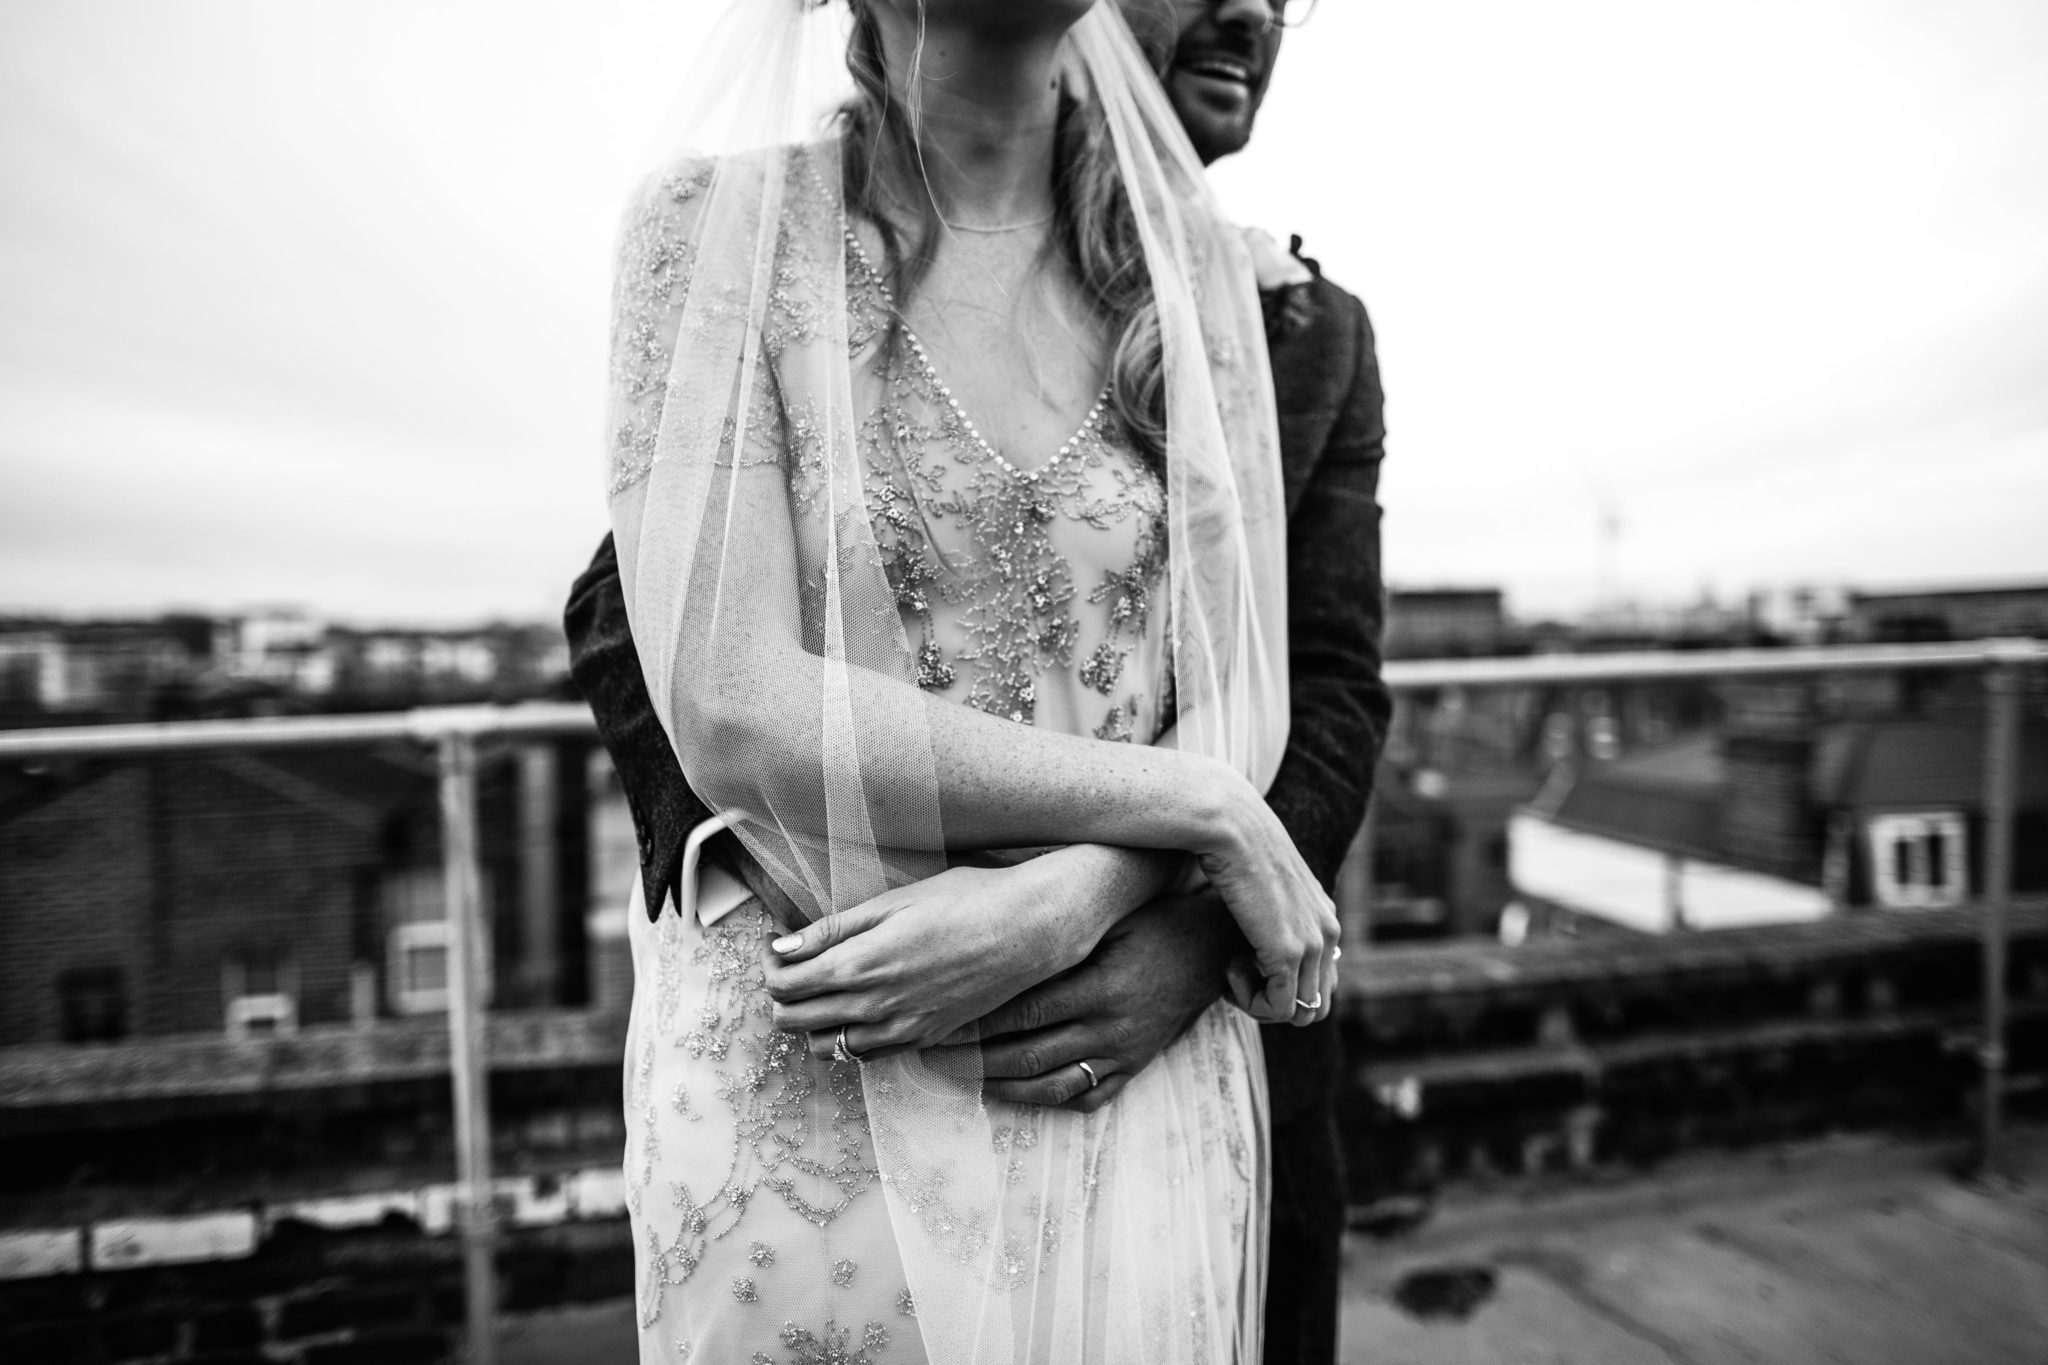 BRIDE AND GROOM AUTUMN WEDDING AT ONE FRIENDLY PLACE COUPLES PORTRAITS WITH PROPS AND DECORATION ROOFTOP OF WAREHOUSE WEDDING IN LONDON